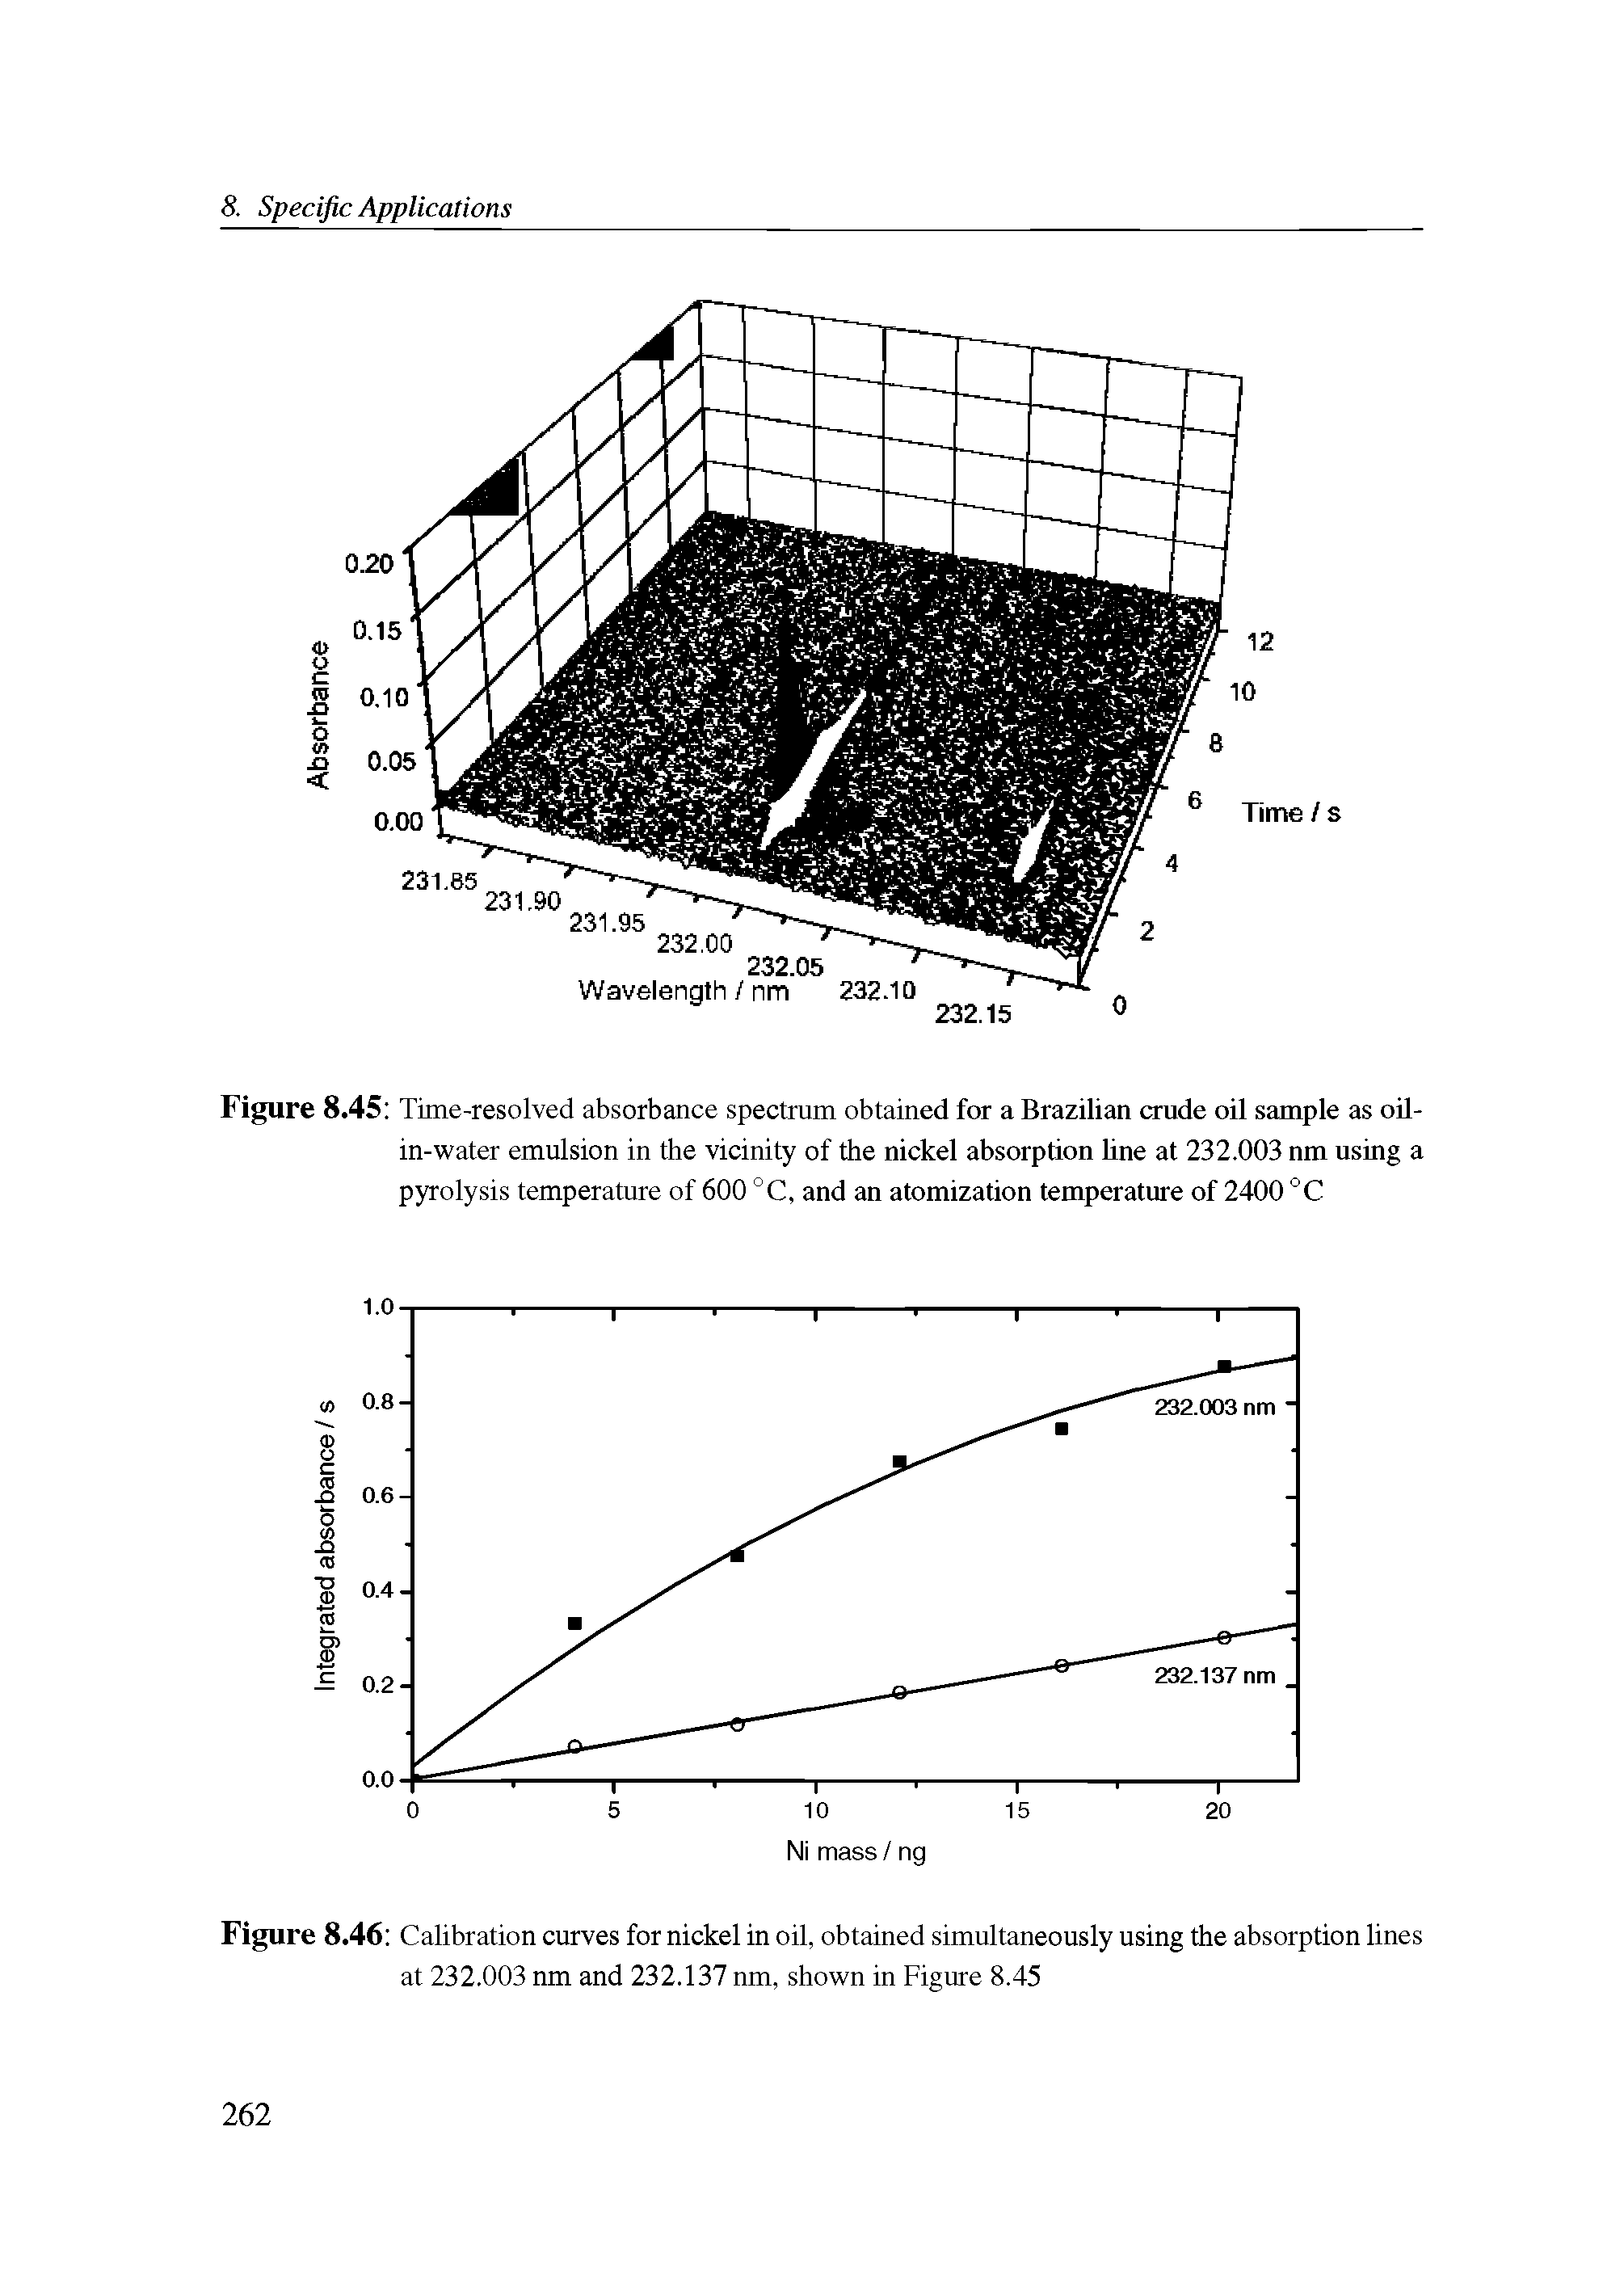 Figure 8.46 Calibration curves for nickel in oil, obtained simultaneously using the absorption lines at 232.003 nm and 232.137 nm, shown in Figure 8.45...